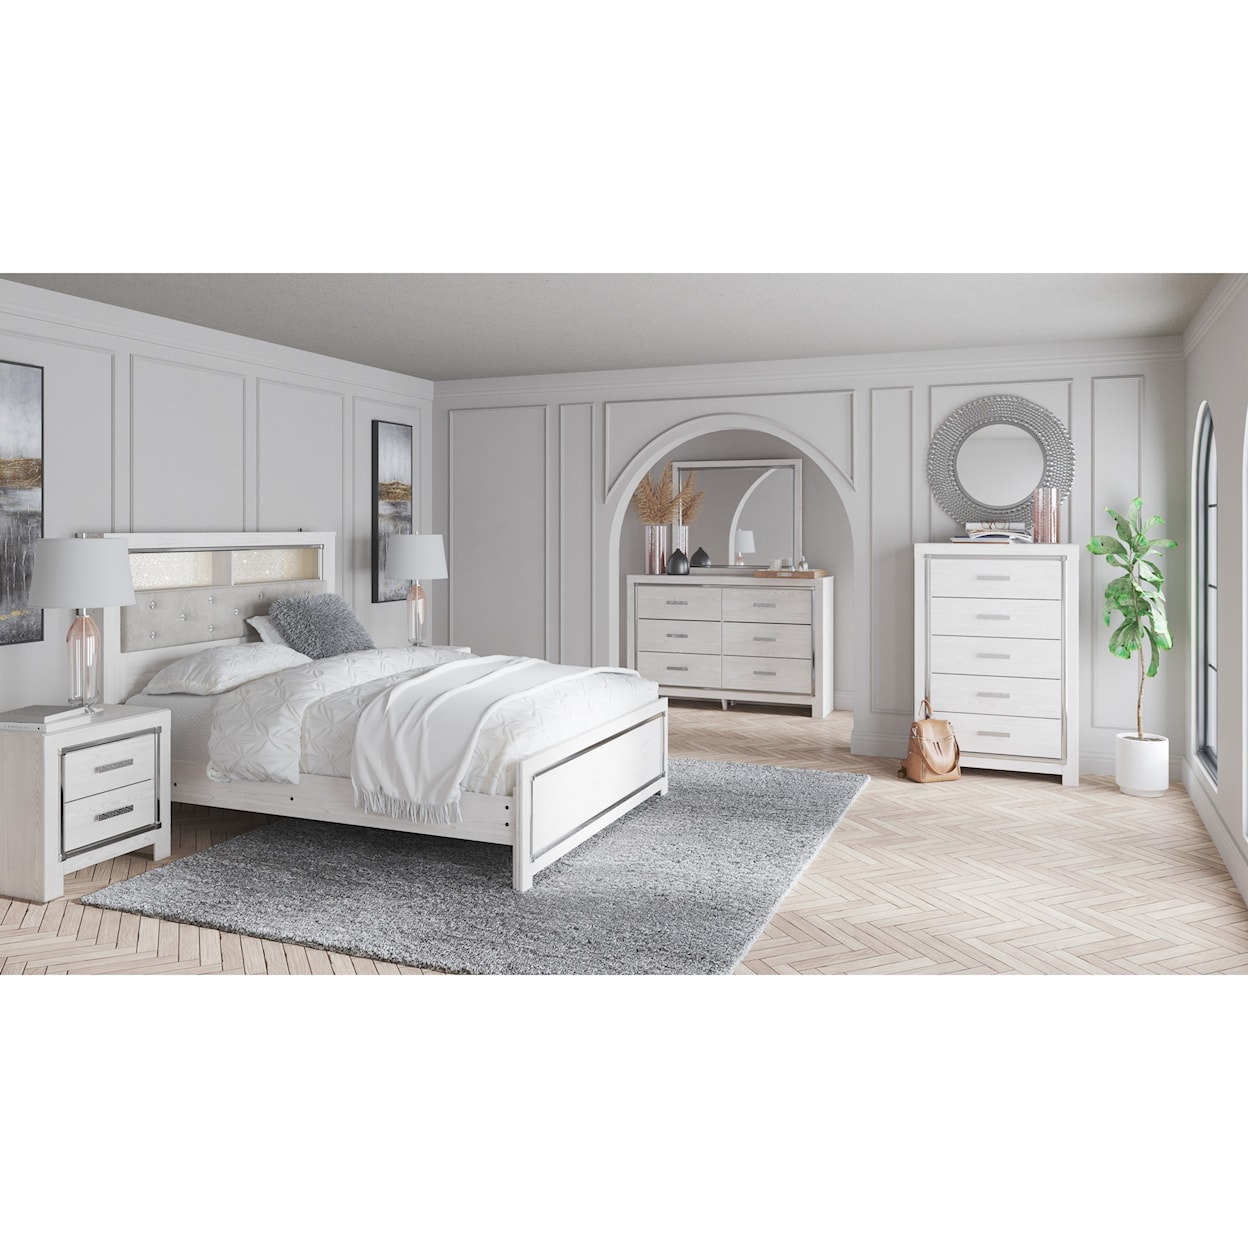 Signature Design by Ashley Altyra Twin Bedroom Group